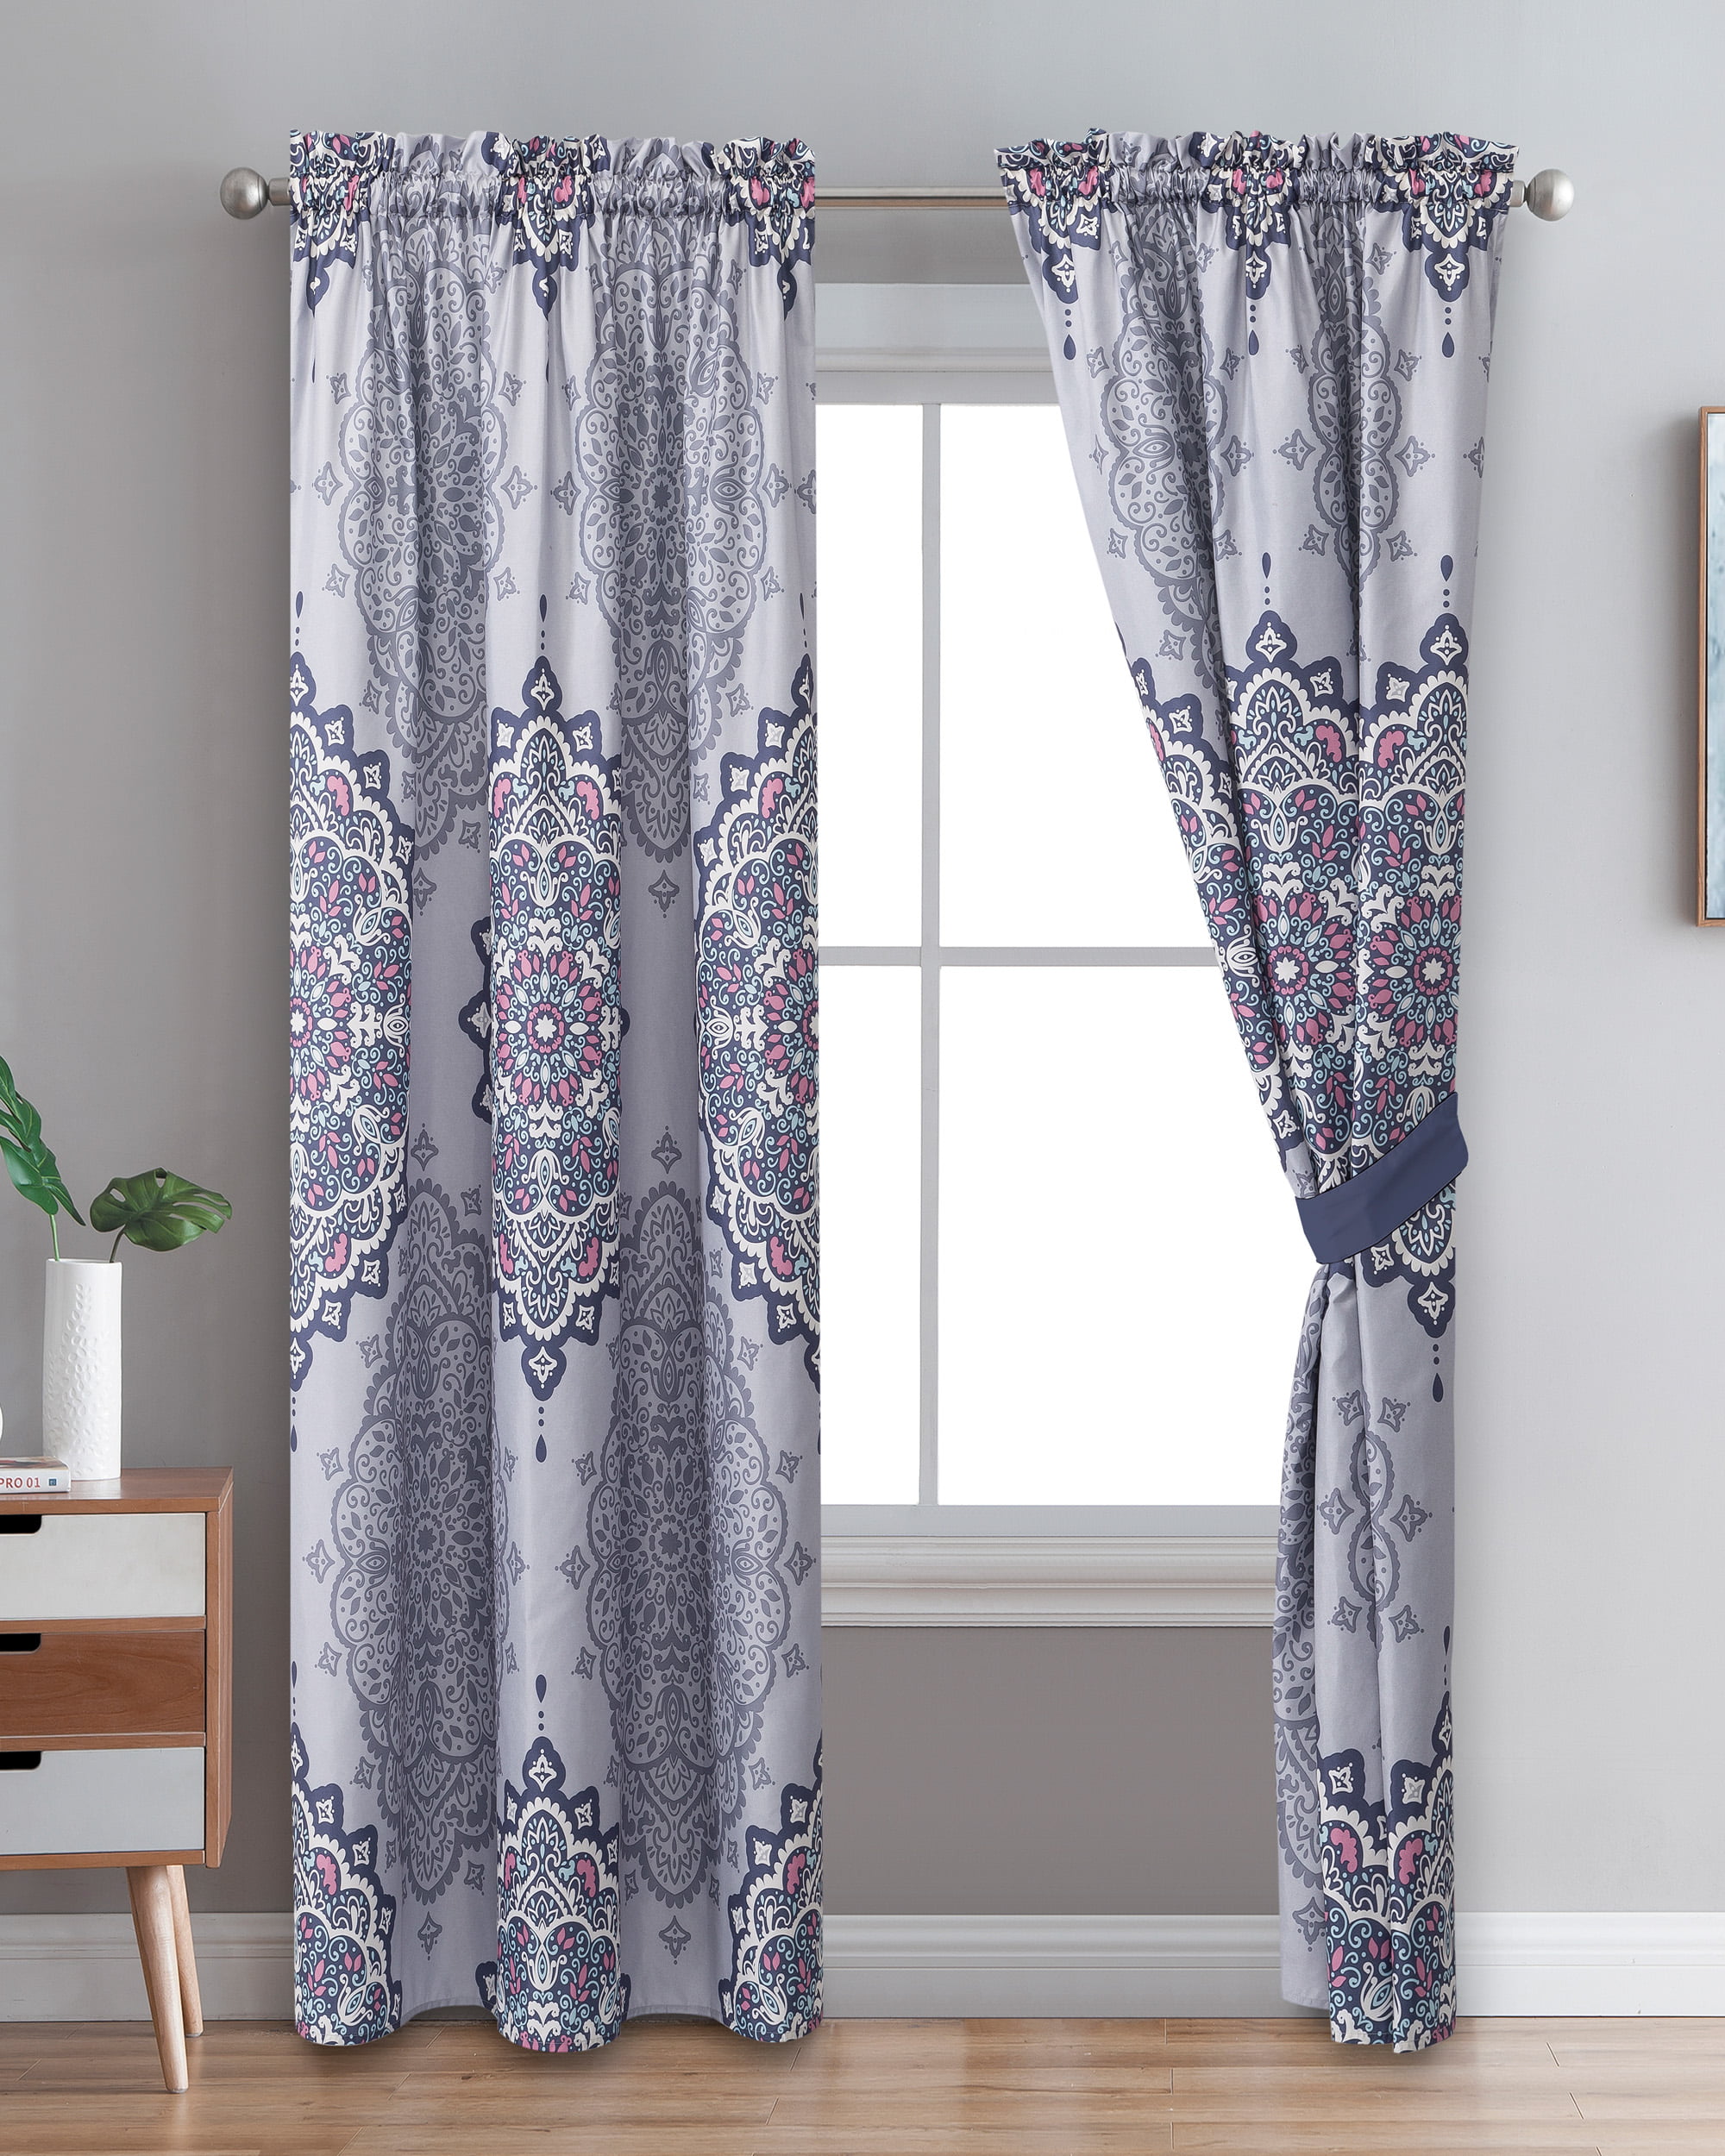 Teal Damask Floral Thermal Dim Out Ready Made Pair Of Ring Top Eyelet Curtains 